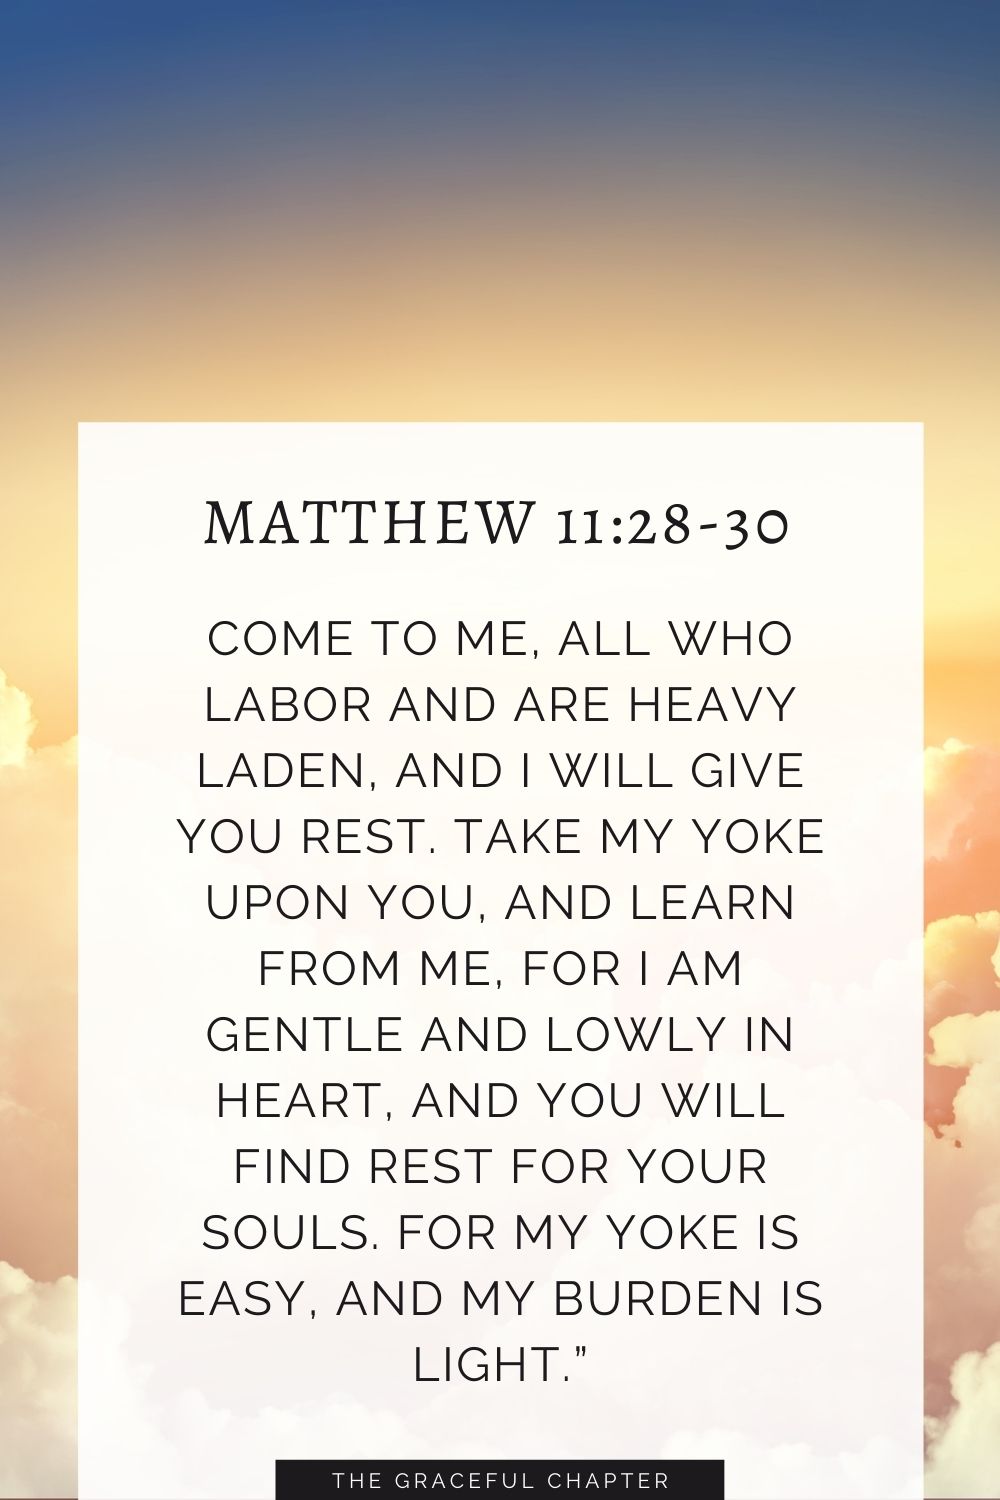 Come to me, all who labor and are heavy laden, and I will give you rest. Take my yoke upon you, and learn from me, for I am gentle and lowly in heart, and you will find rest for your souls. For my yoke is easy, and my burden is light.” Matthew 11:28-30